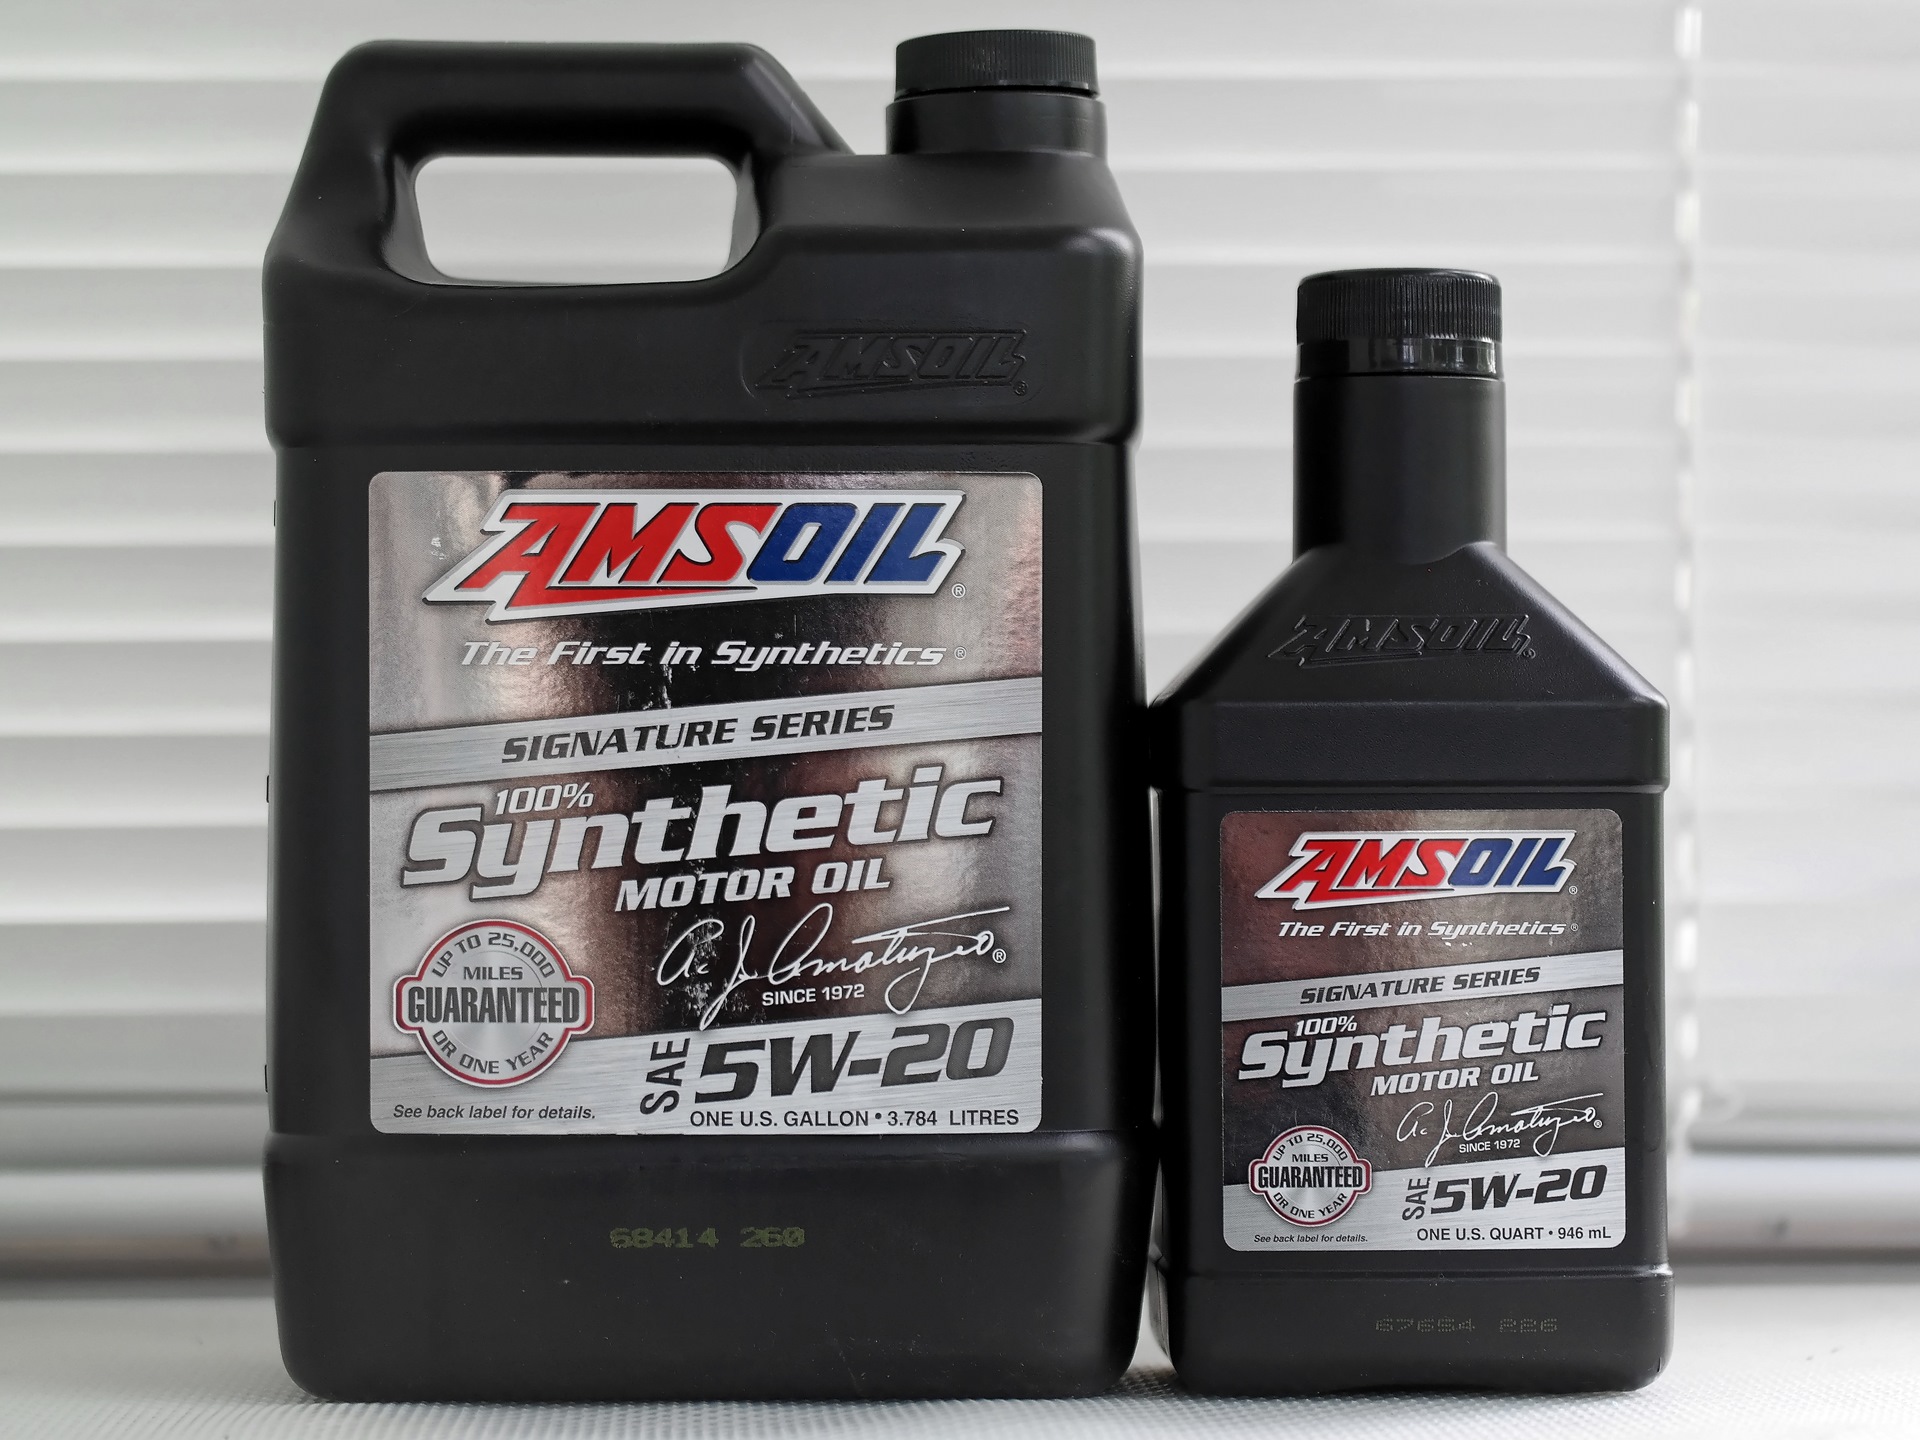 Amsoil signature series synthetic. AMSOIL 5w20. AMSOIL 5w20 артикул. AMSOIL Signature Series 5w-30. AMSOIL Signature Series Synthetic Motor Oil 5w-30.